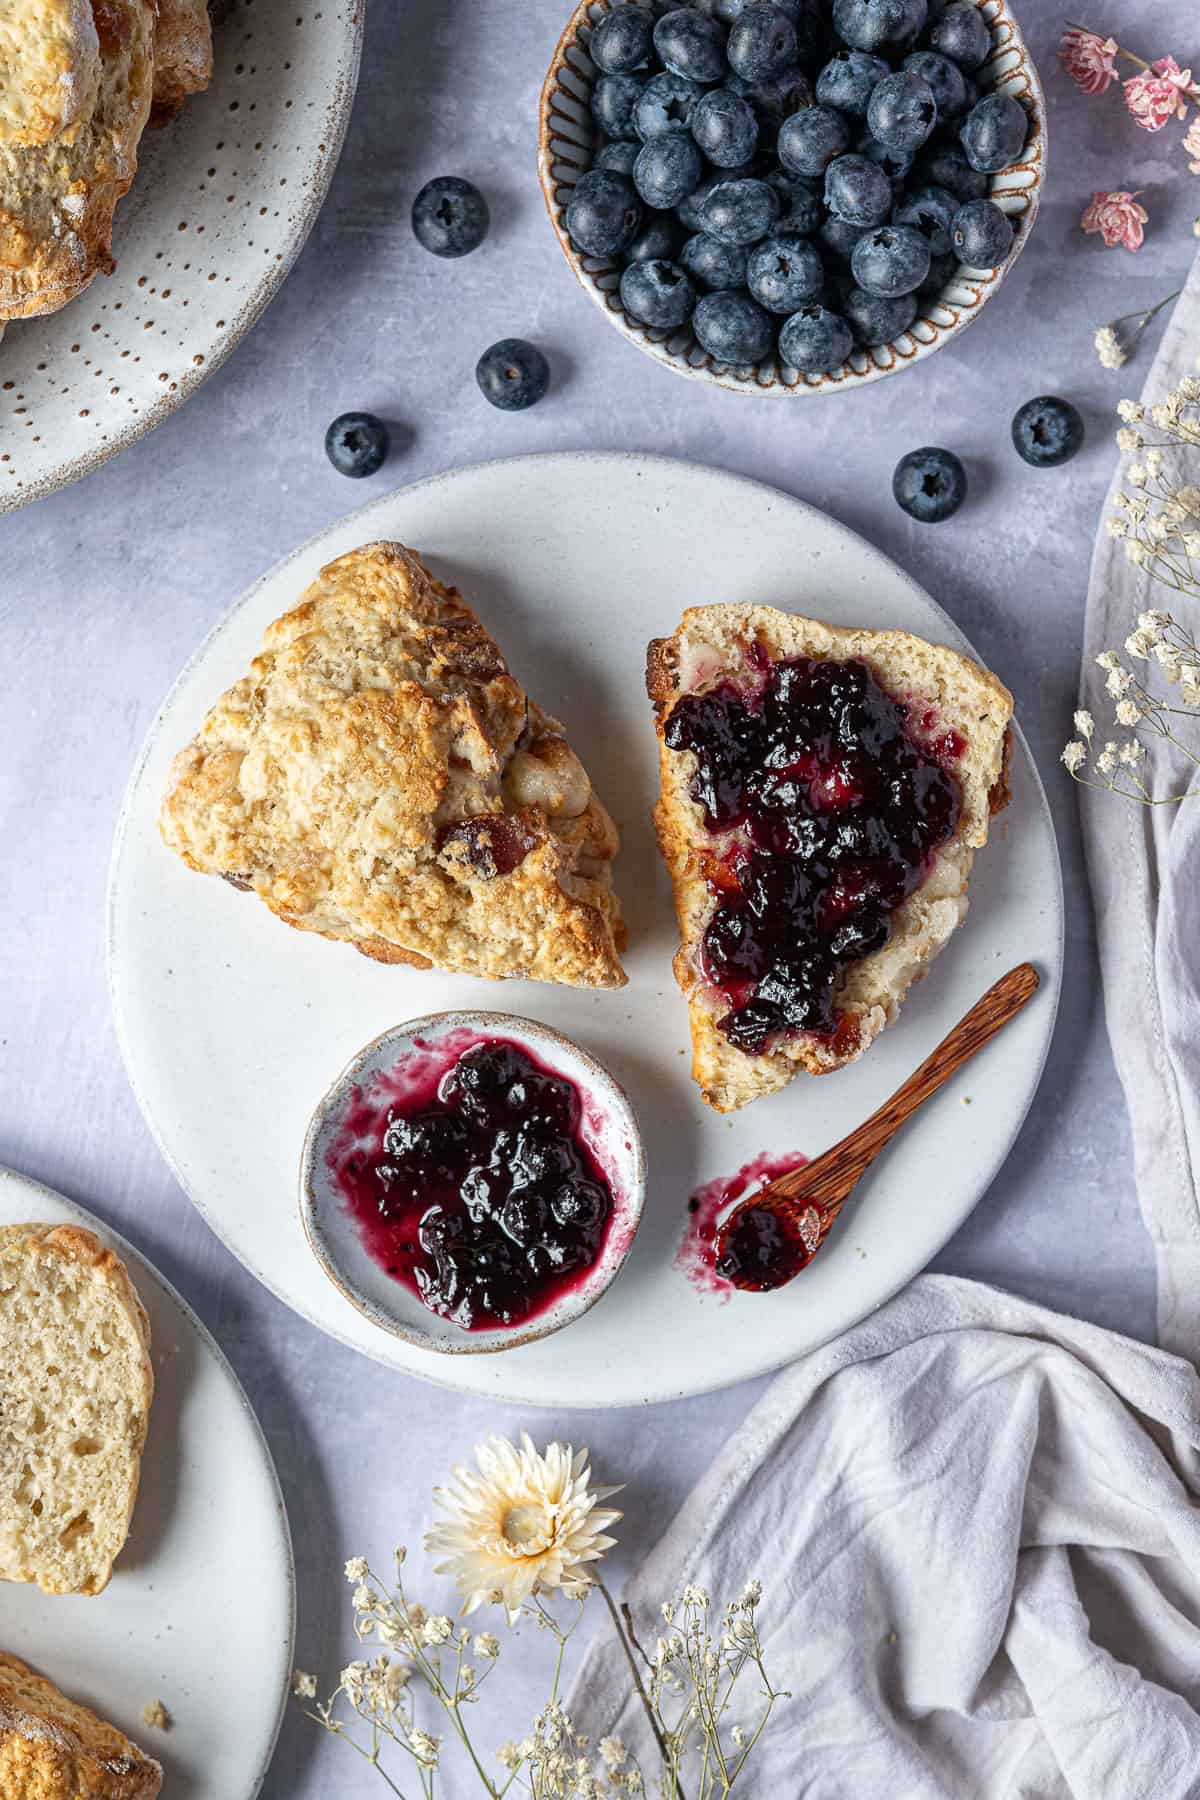 A scone sliced in half on a white plate with jam, surrounded by a bowl of blueberries, dried flowers, grey linen and plates of scones.